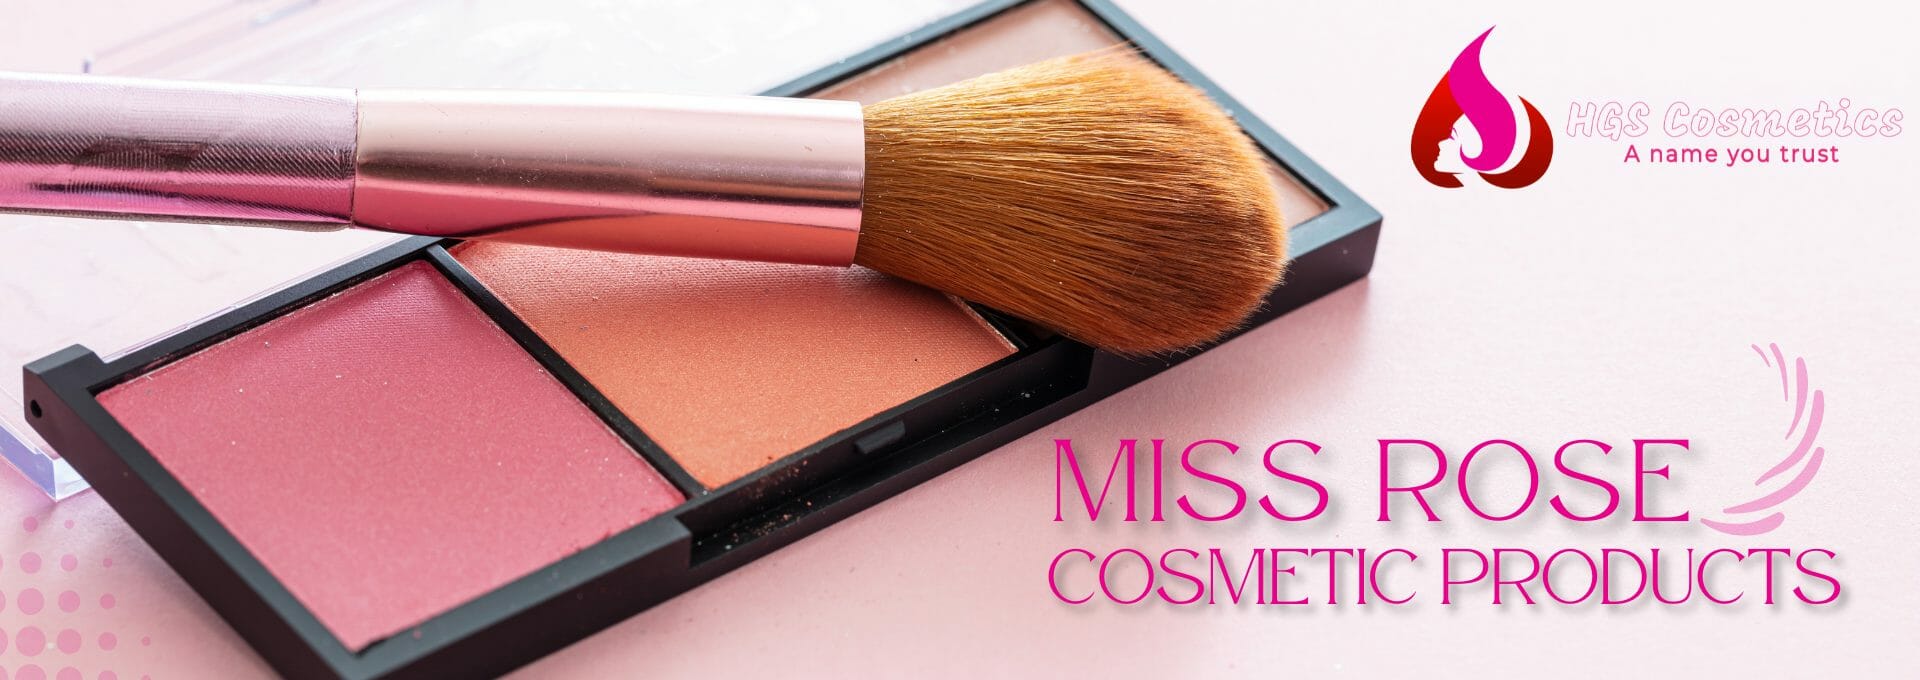 Buy Original Miss Rose Products Online in Pakistan @ HGS Cosmetics